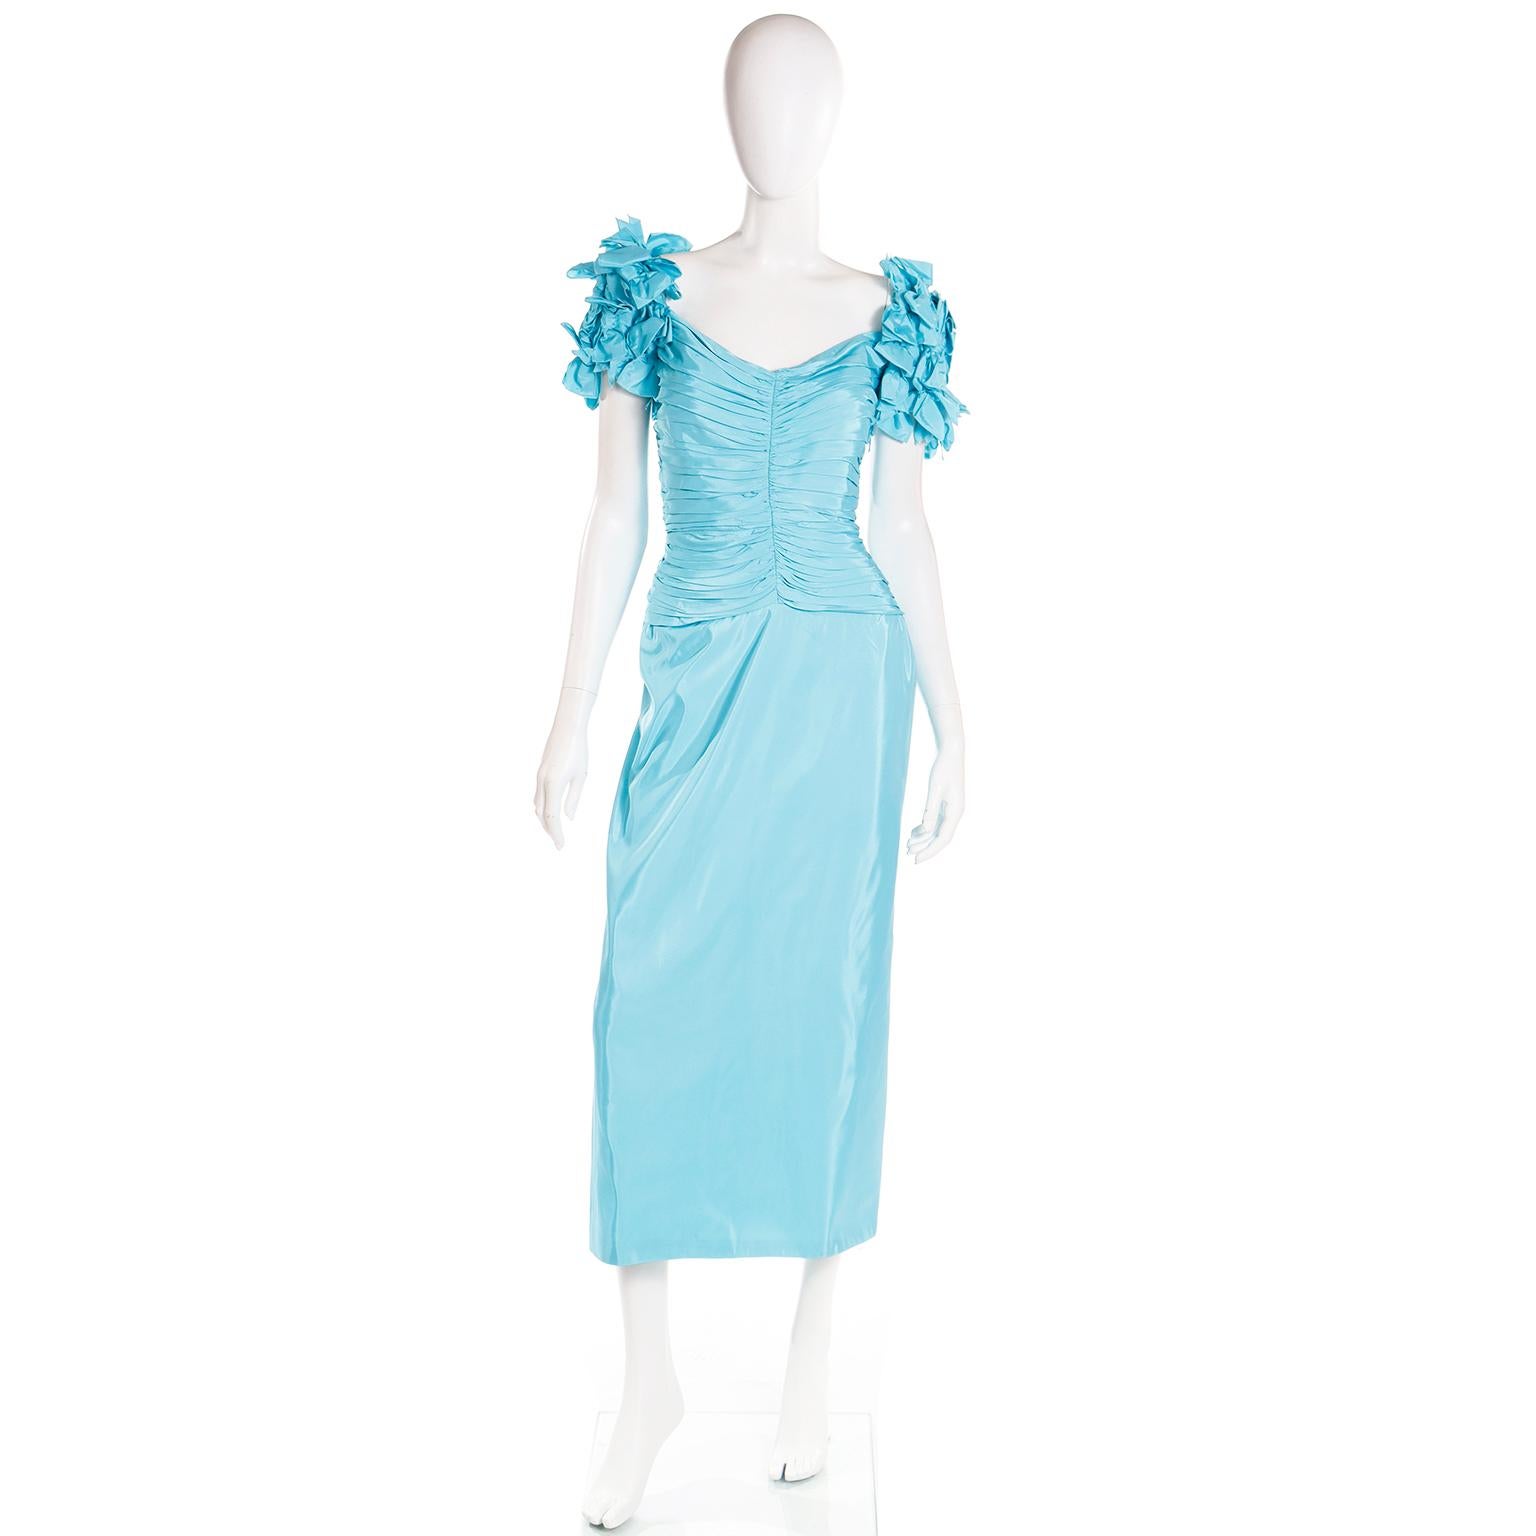 This is a vintage Tadashi evening dress in a pretty blue satin with flattering horizontal ruching from the neckline to the high hip. We love the dramatic sleeves that are covered in little bows! The dress closes with a hidden center back zipper and